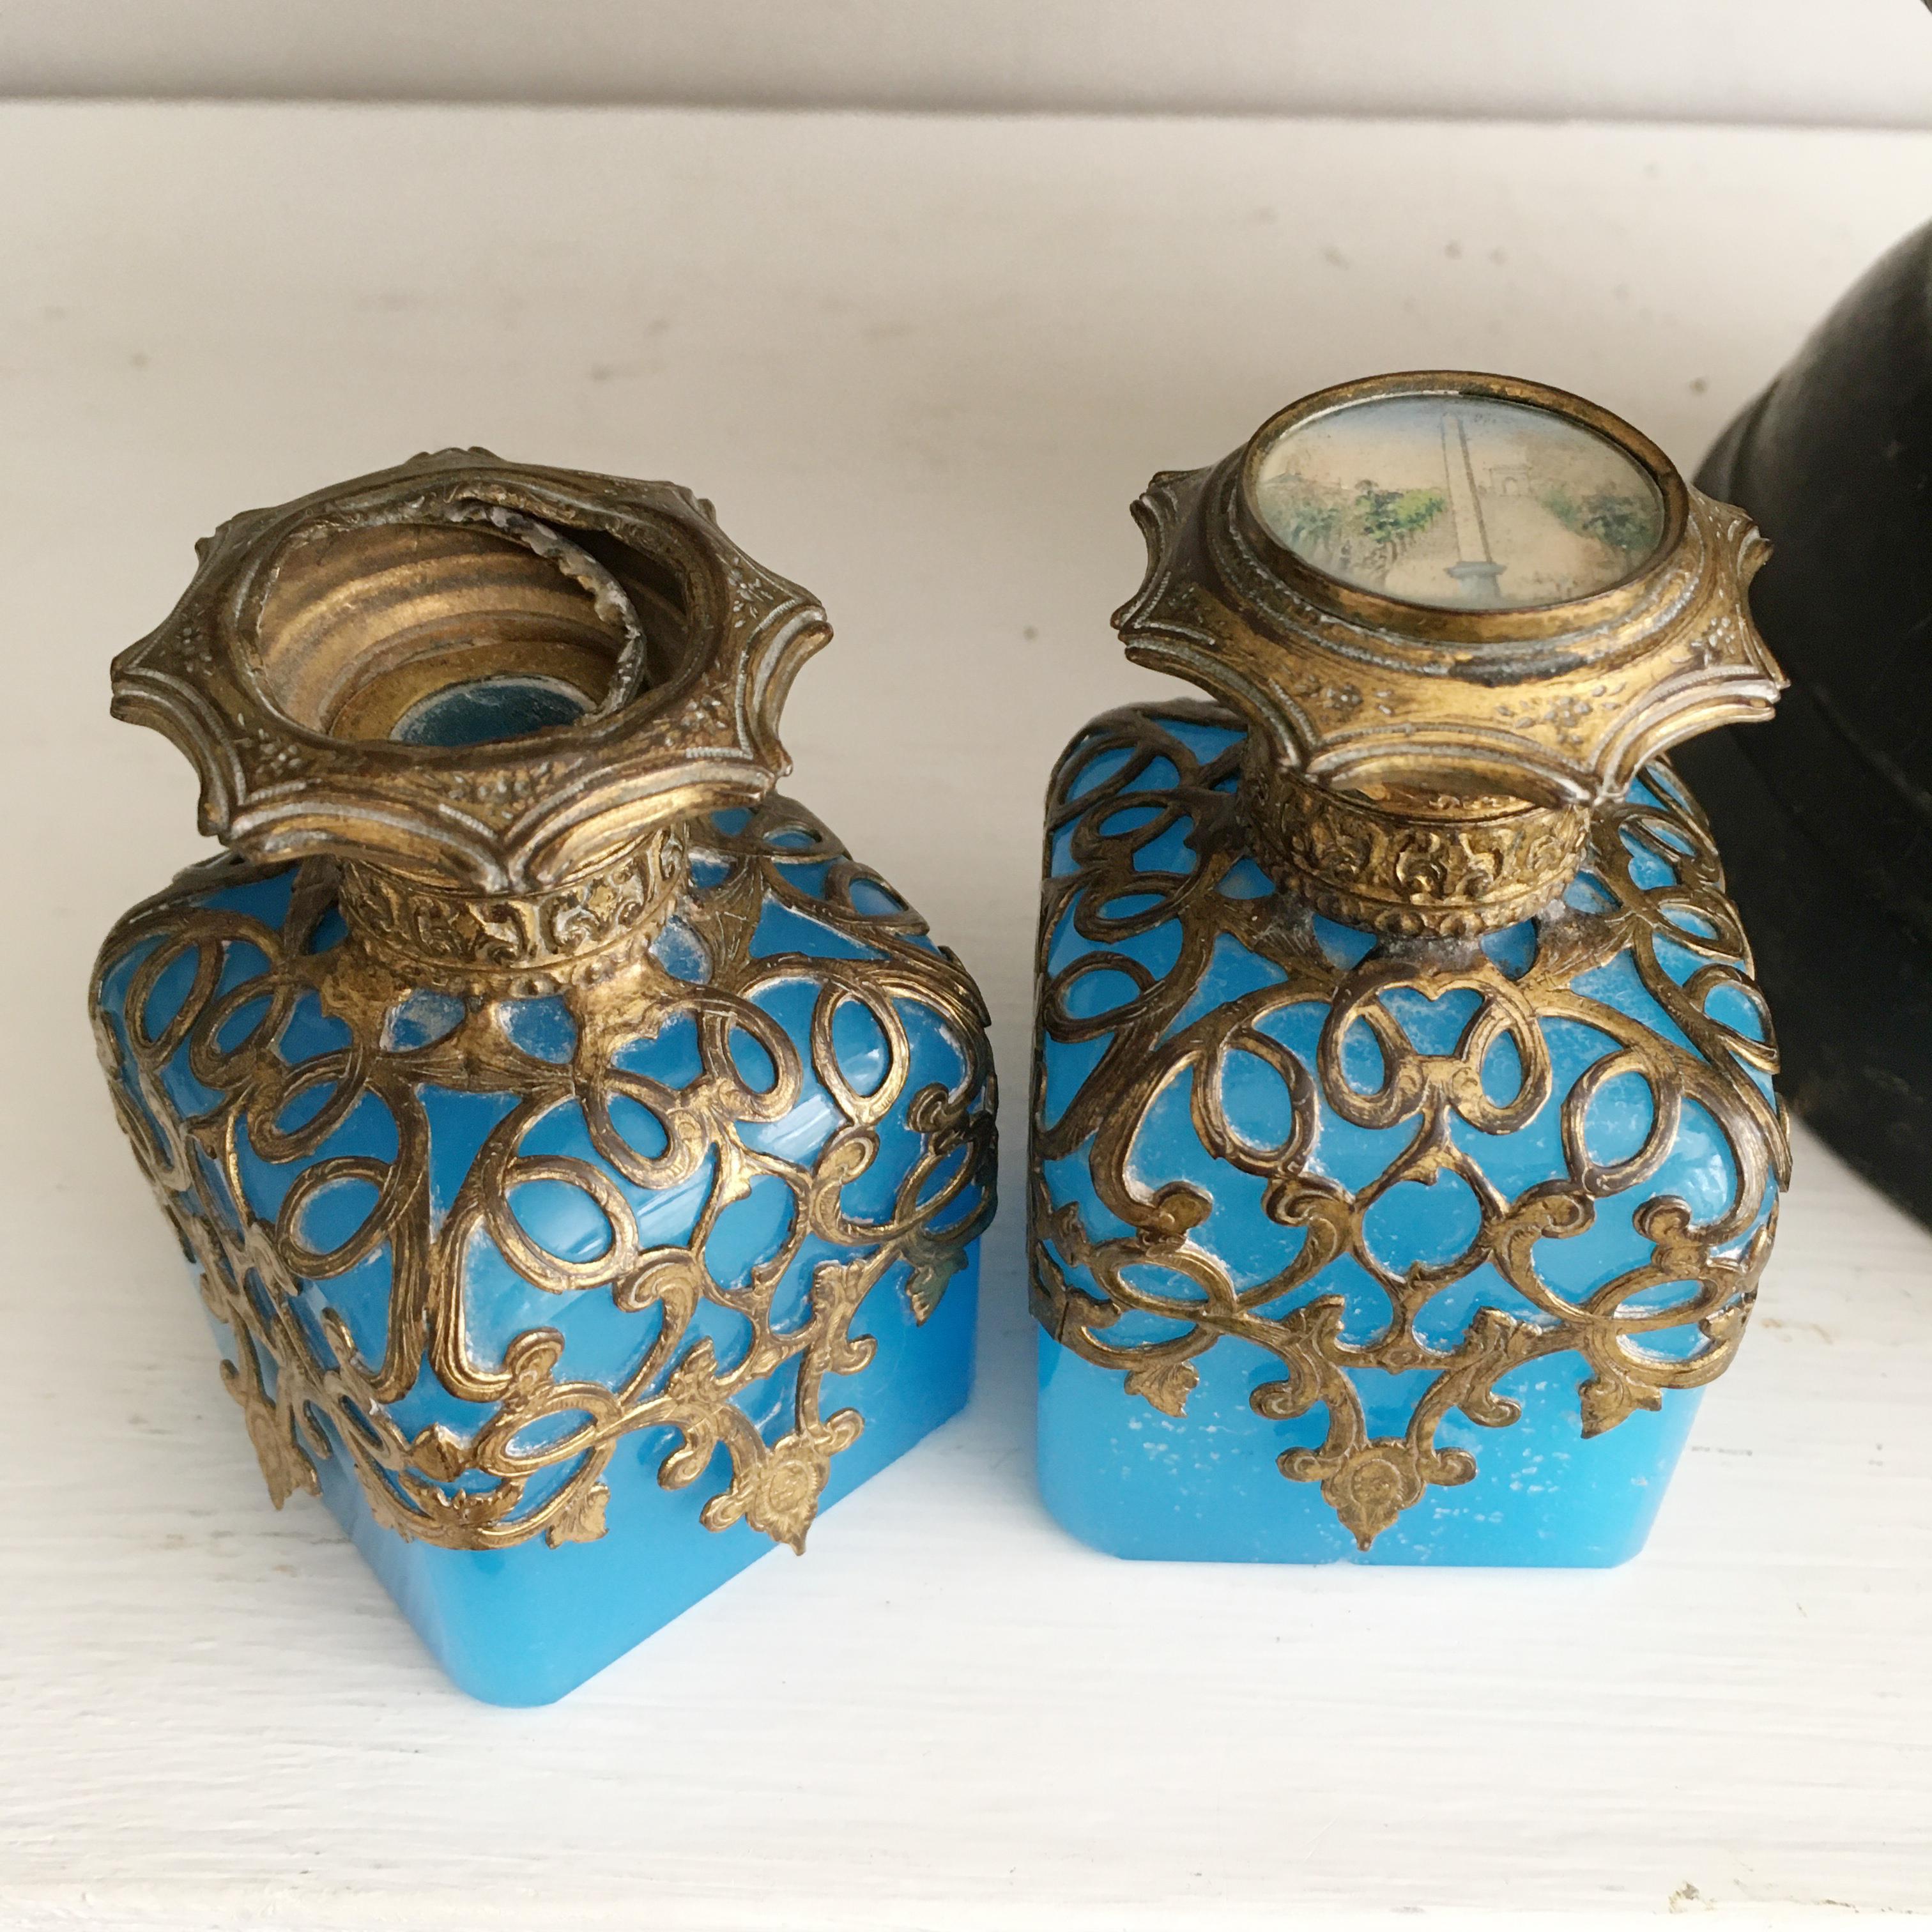 These exquisite 19th century Palais Royal blue opaline and d'ore bronze (Ormolu) perfume bottles from the Grand Tour circa 1860, a beautiful example of French opaline art glass.

The hinged lid on one bottle has a miniature of the Arc De Triomphe